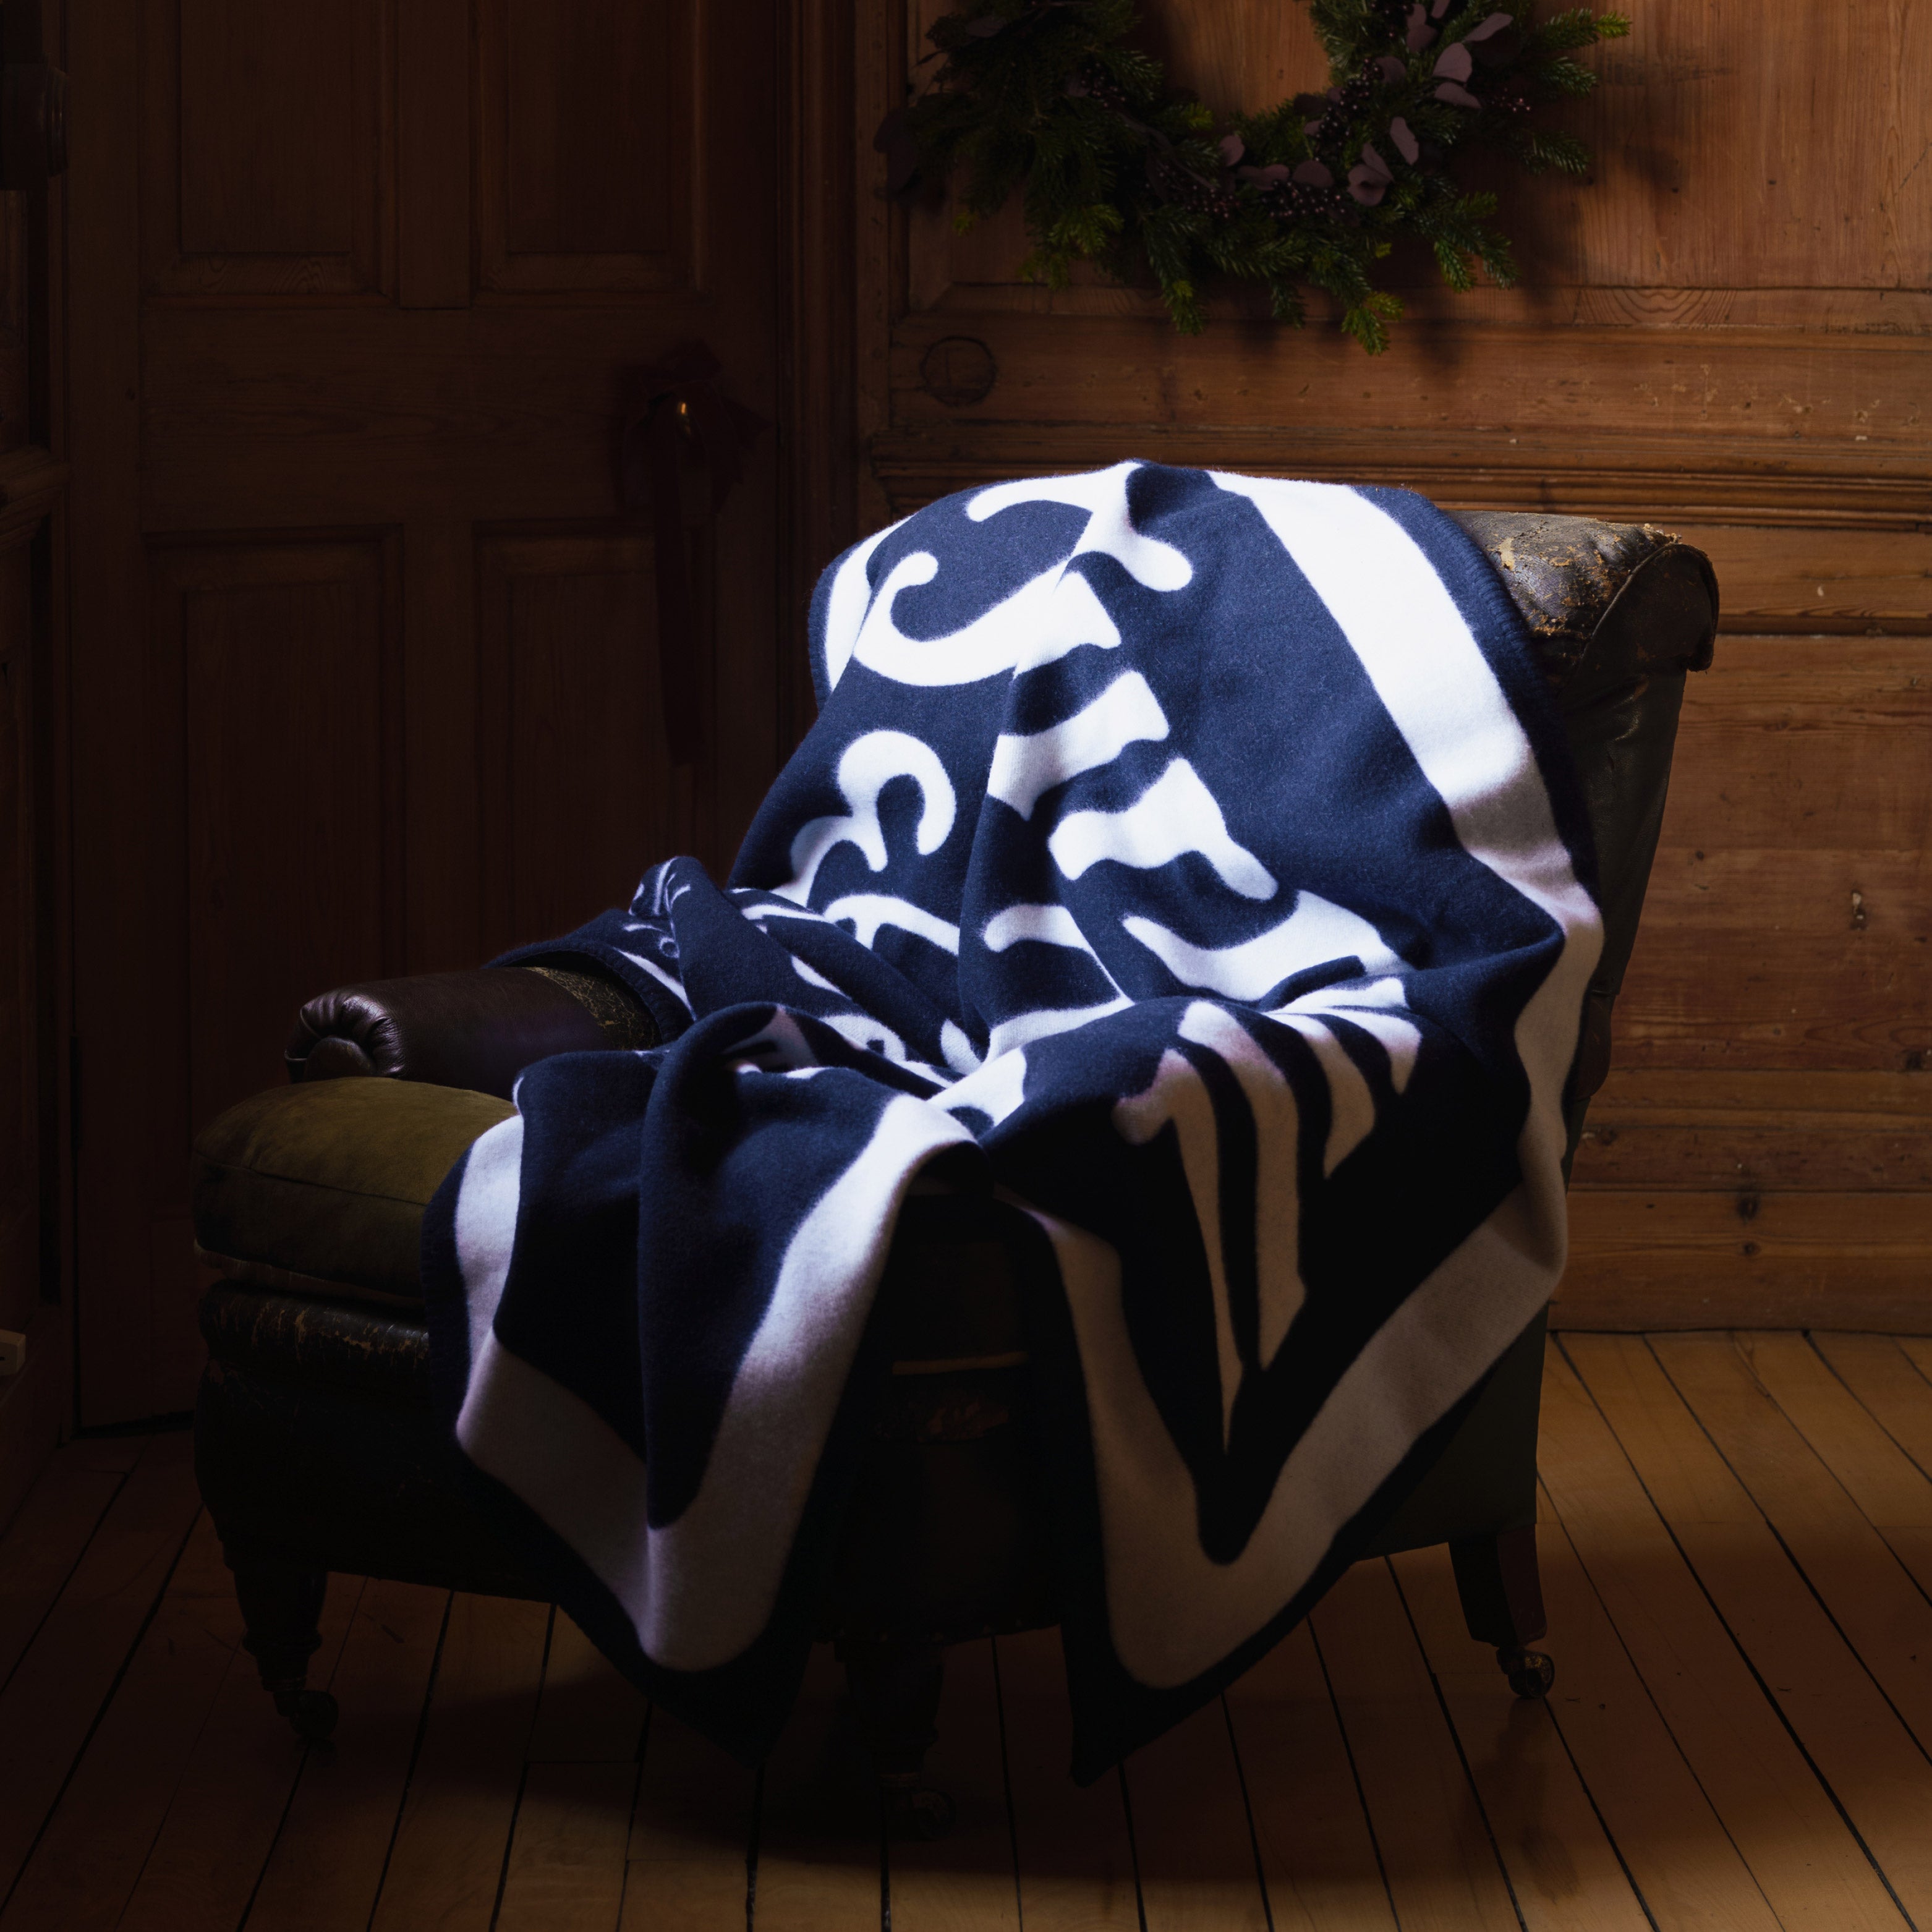 Cream and Navy Jermyn St. Lambswool and Cashmere Woven Blanket